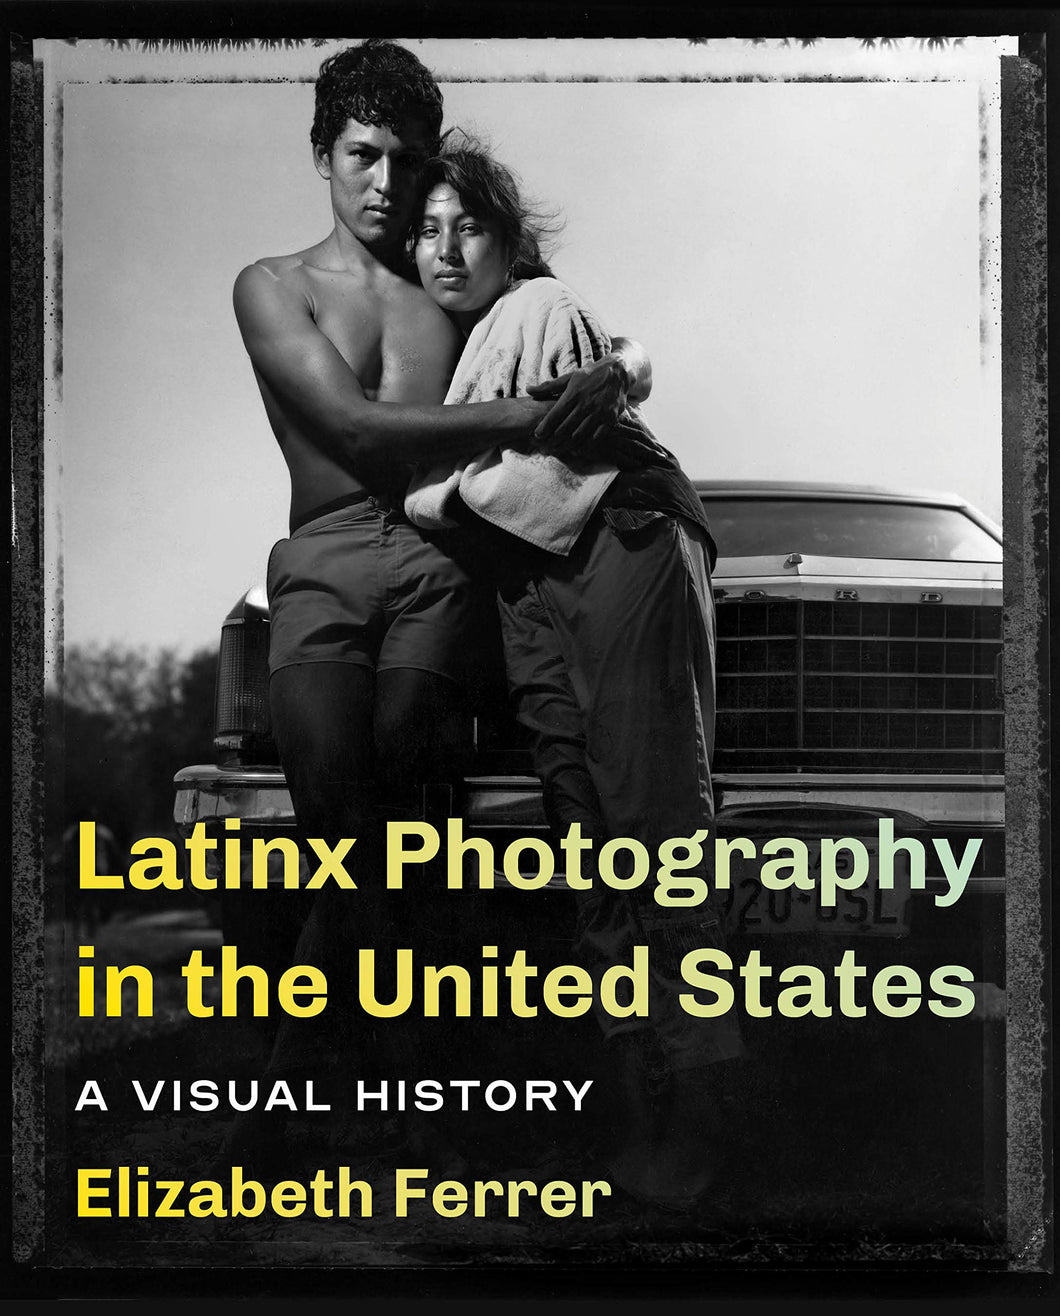 Latinx Photography in the United States: A Visual History by Elizabeth Ferrer